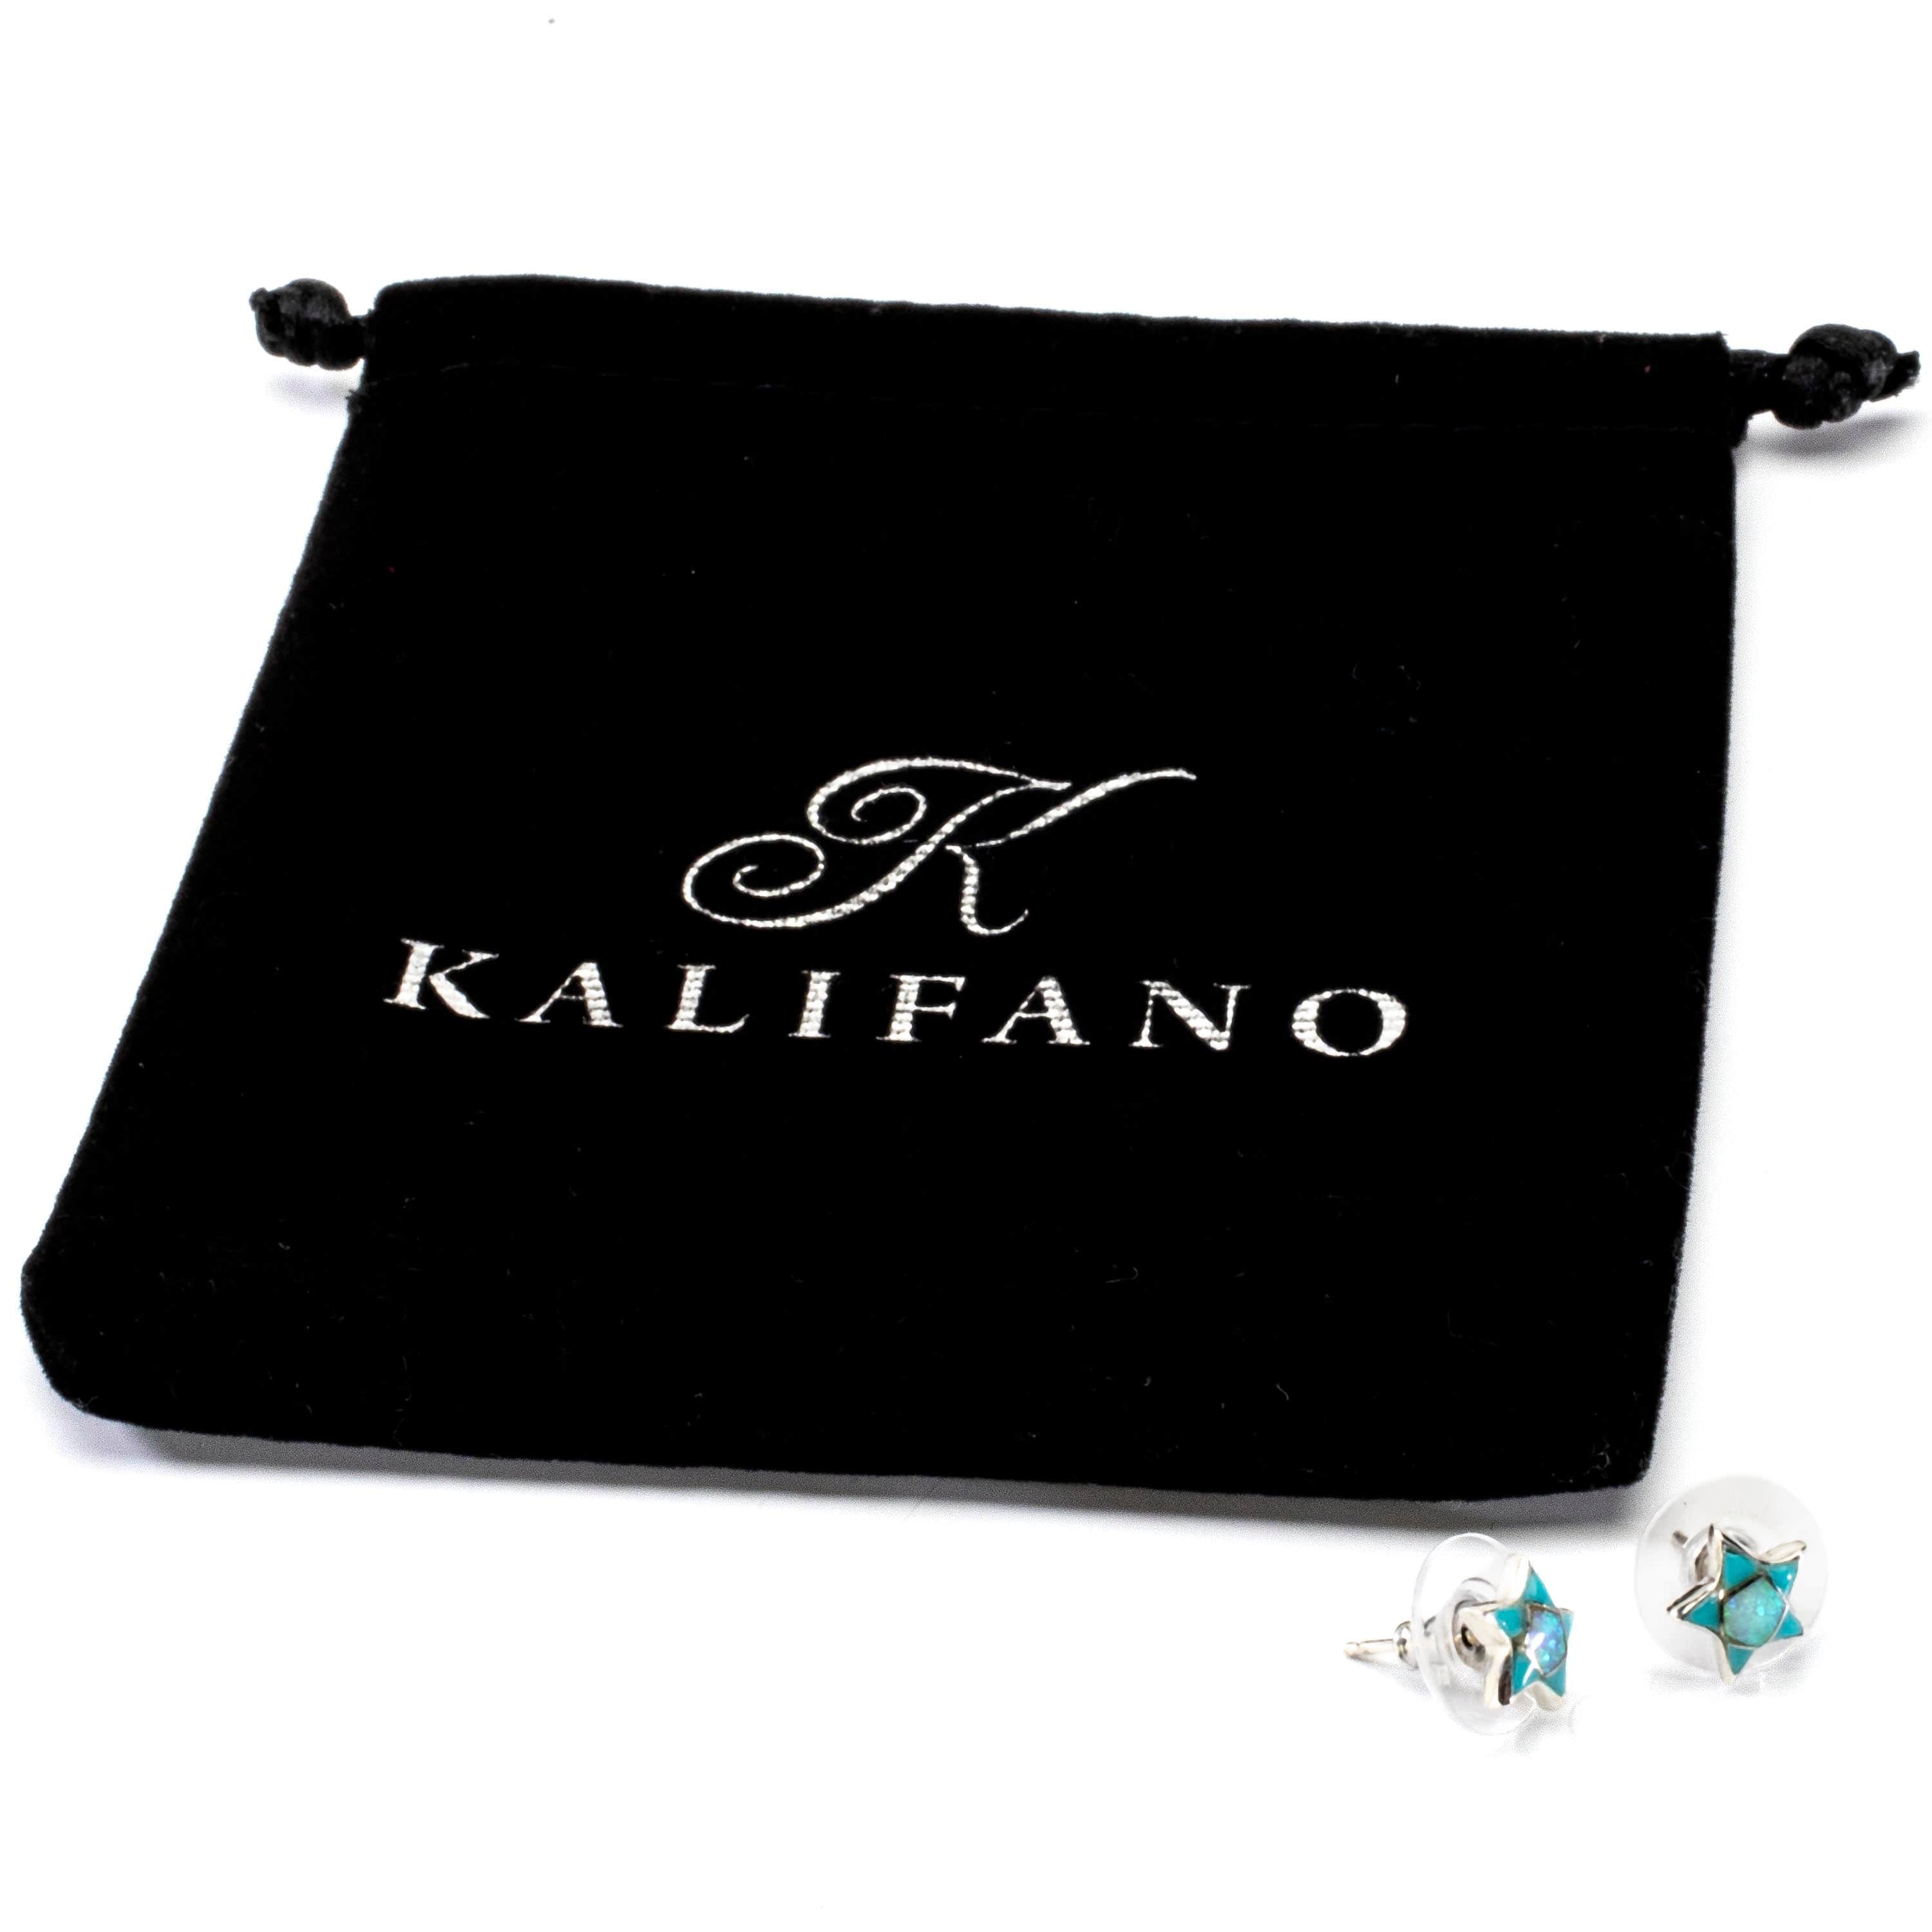 Kalifano Southwest Silver Jewelry Turquoise and Opal Star Earrings Handmade with Sterling Silver and Opal Accent NME.2243.TQ